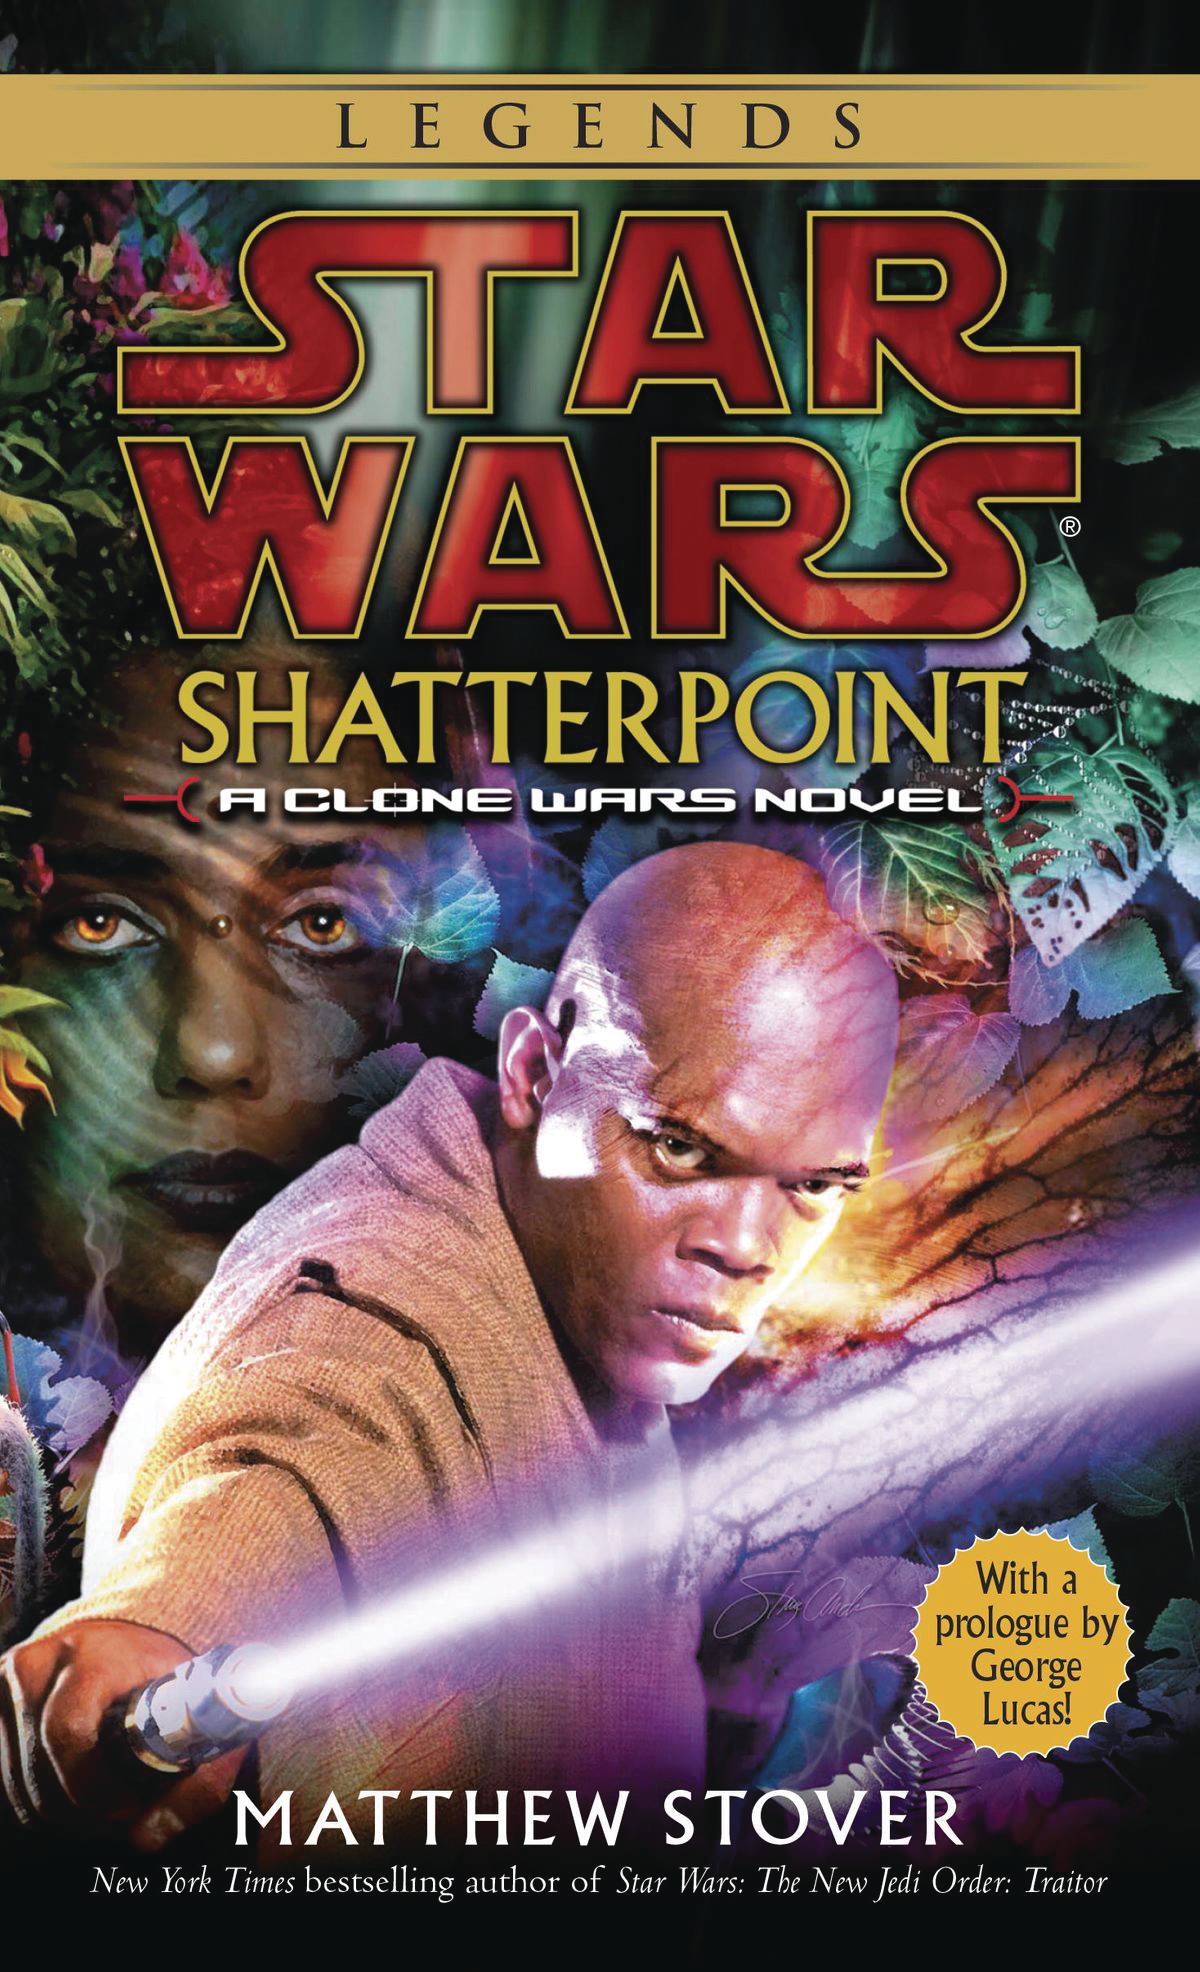 Star Wars Legends Shatterpoint SC - State of Comics